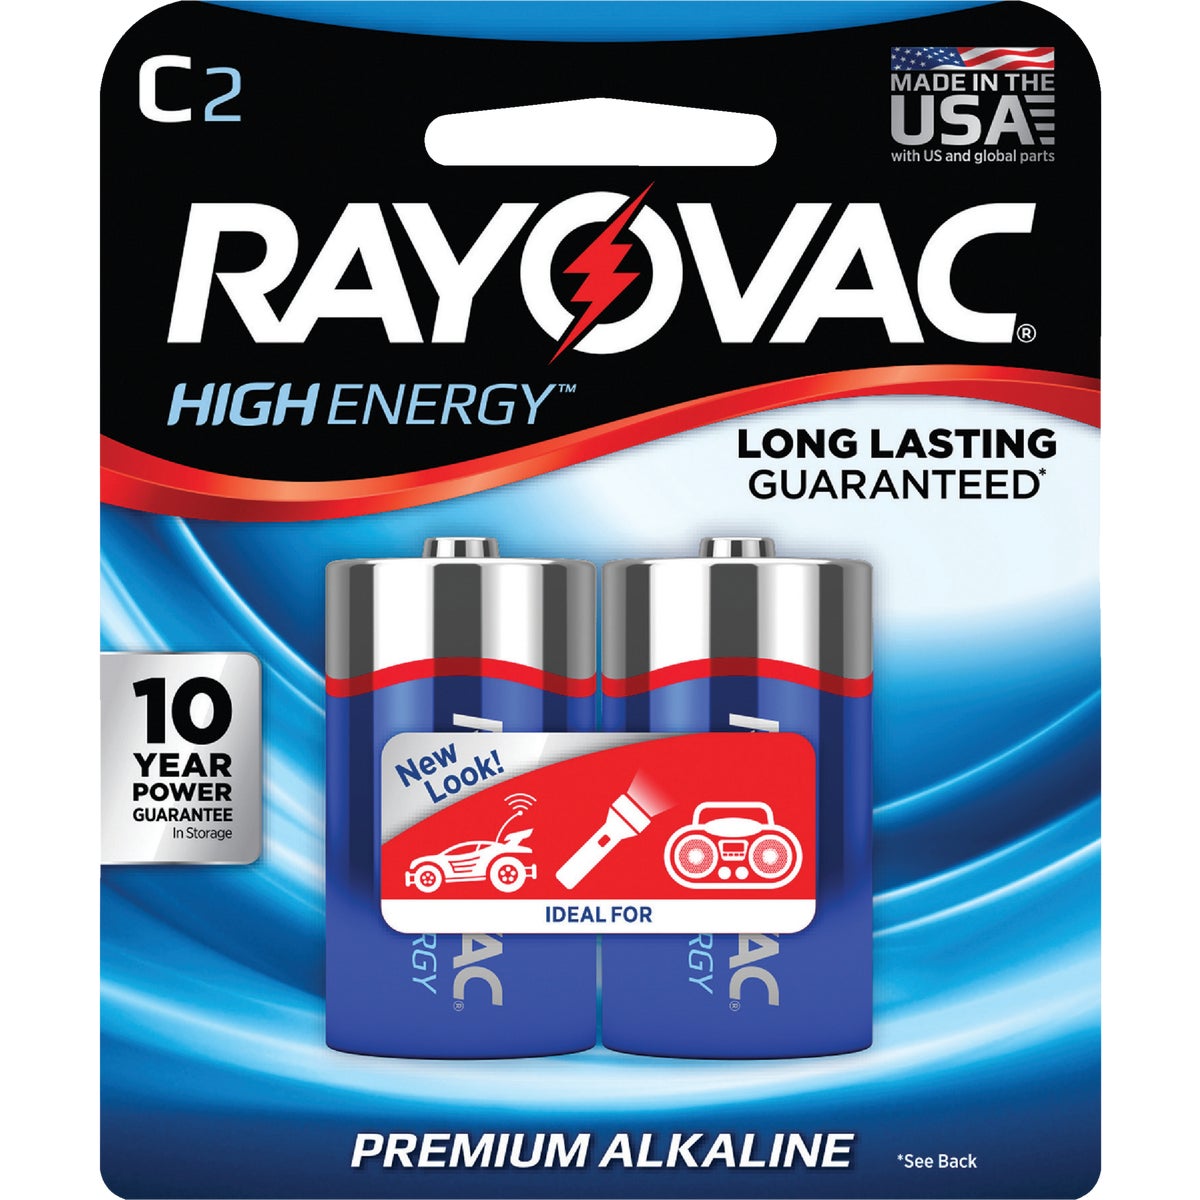 Item 820874, Mercury-free alkaline batteries have a Ready Power technology and are 